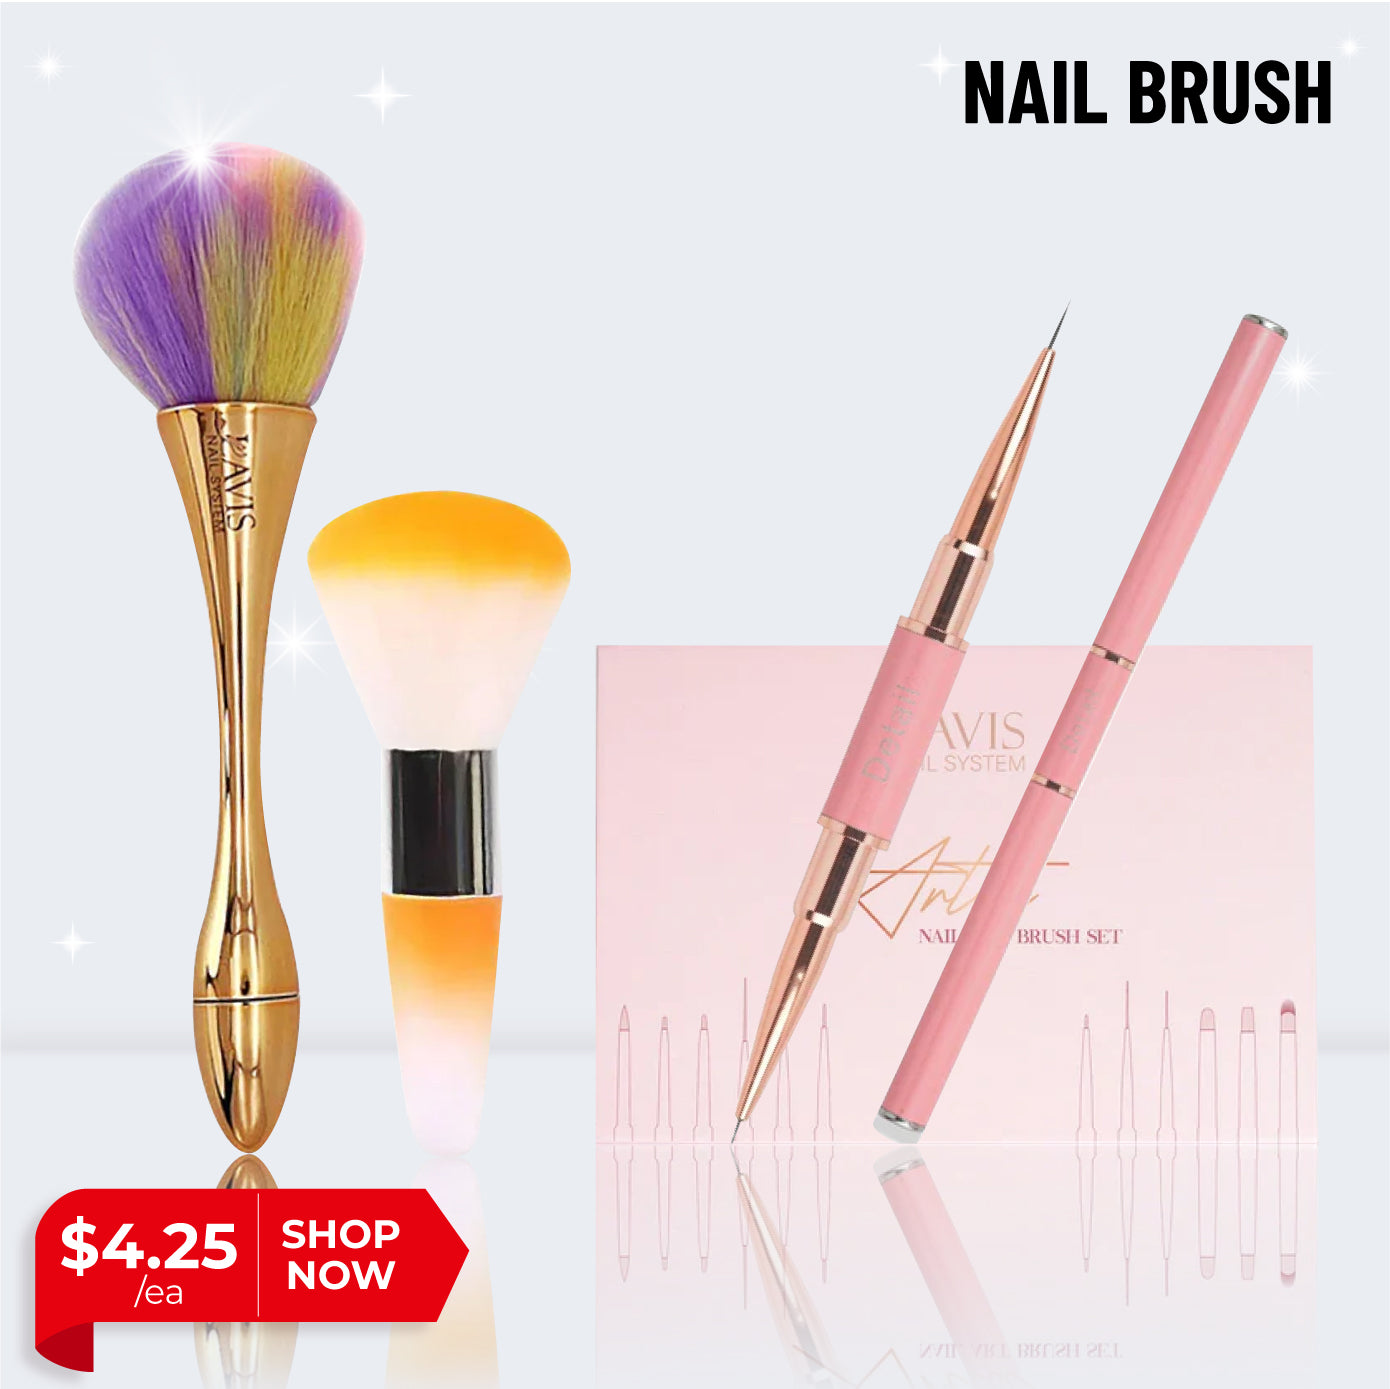 How to Clean Acrylic Nail Brushes? Brush Renewal – Lavis Dip Systems Inc